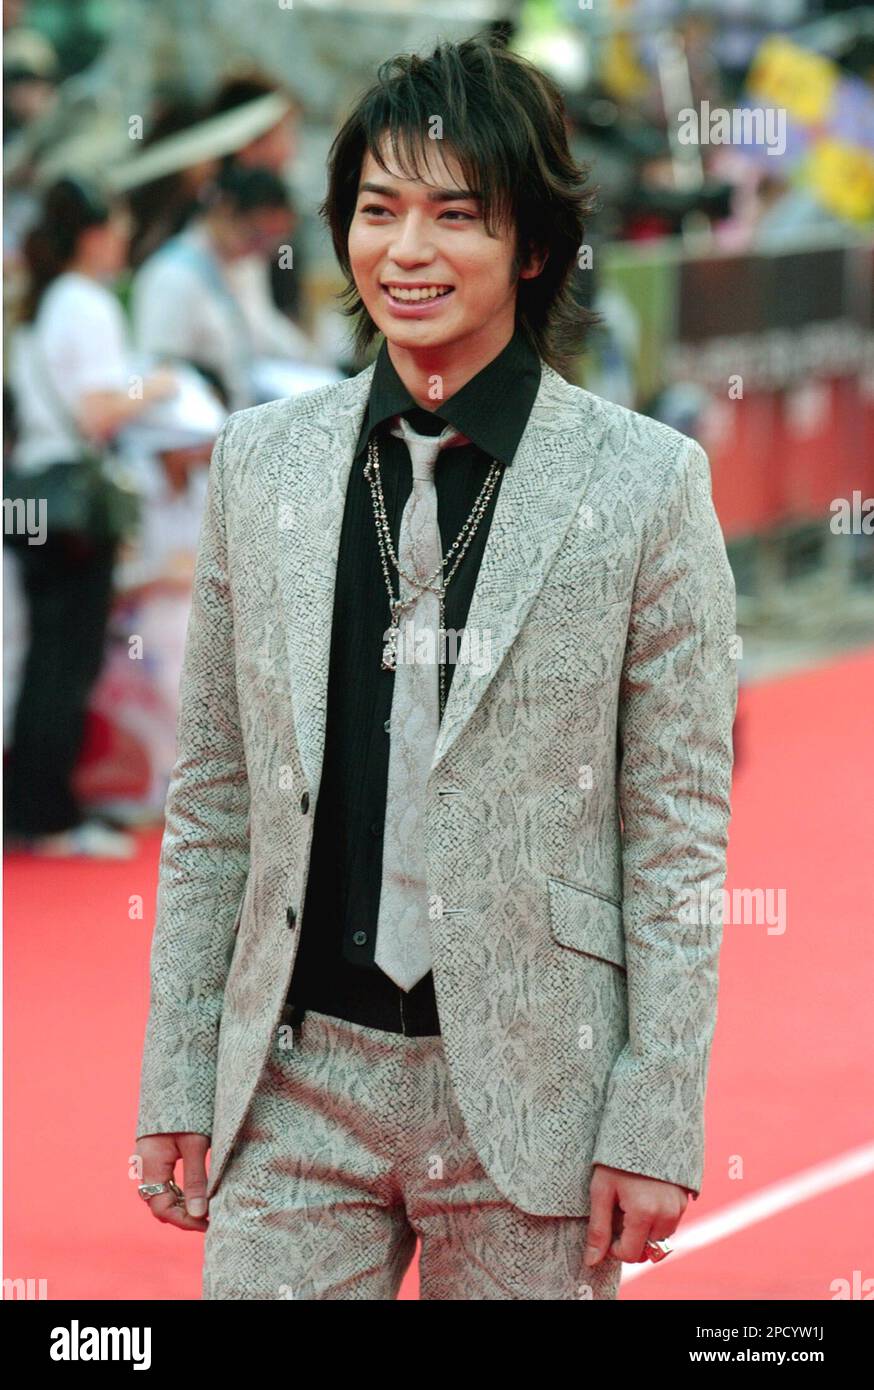 Japanese singer Jun Matsumoto smiles as he arrives at the 17th Golden Melody Awards, Saturday, June 10, 2006, in Taipei, Taiwan. Matsumoto is a guest at this year's Golden Melody Awards_one of the Chinese-language music industry's biggest annual events. (AP Photo/Chiang Ying-ying) Stock Photo